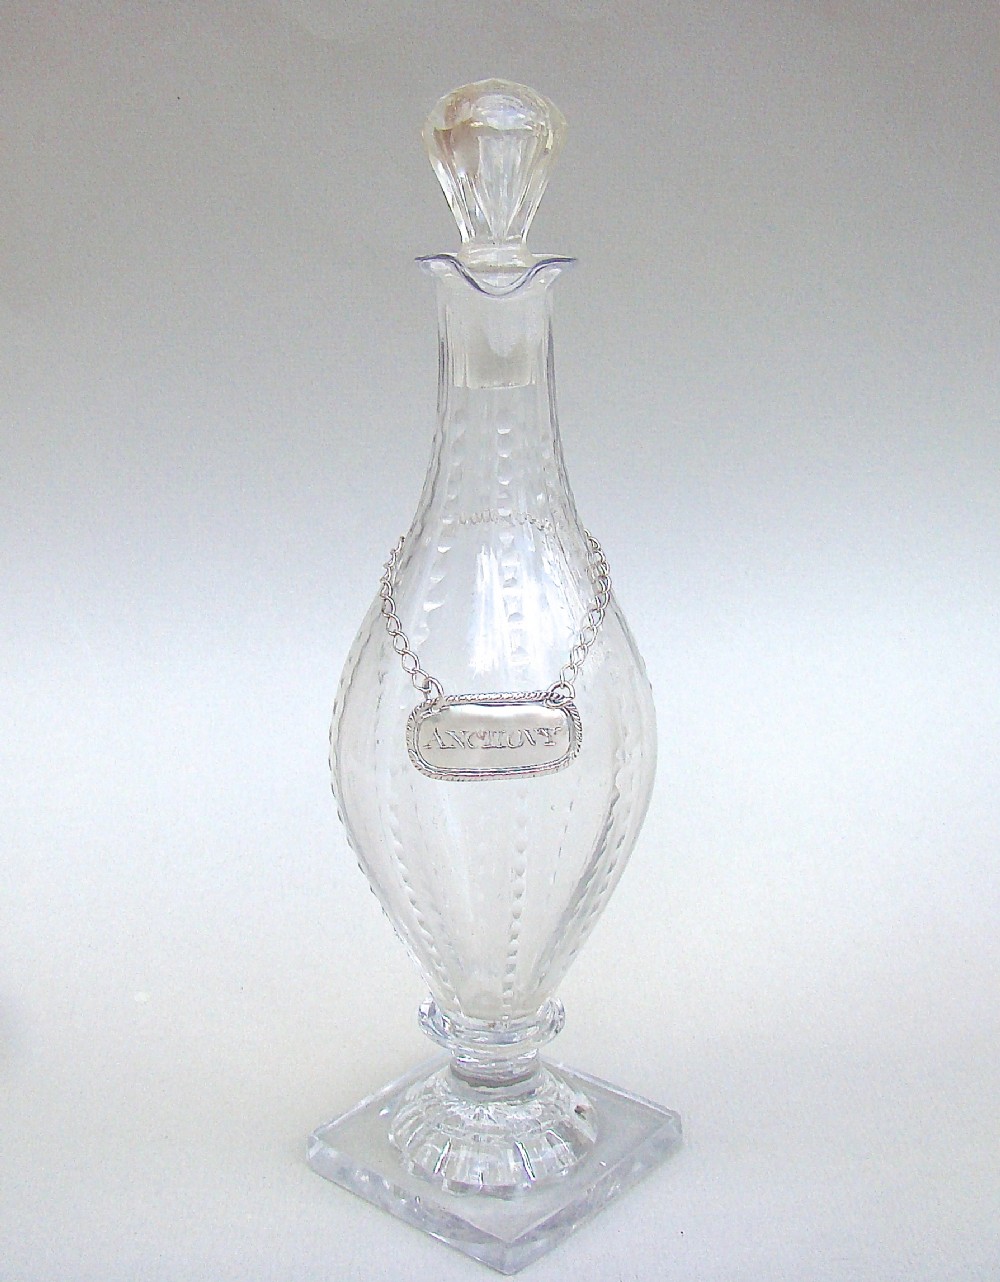 georgian cut glass condiment bottle circa 1790 with anchovy silver sauce label by matthew linwood birmingham 1814